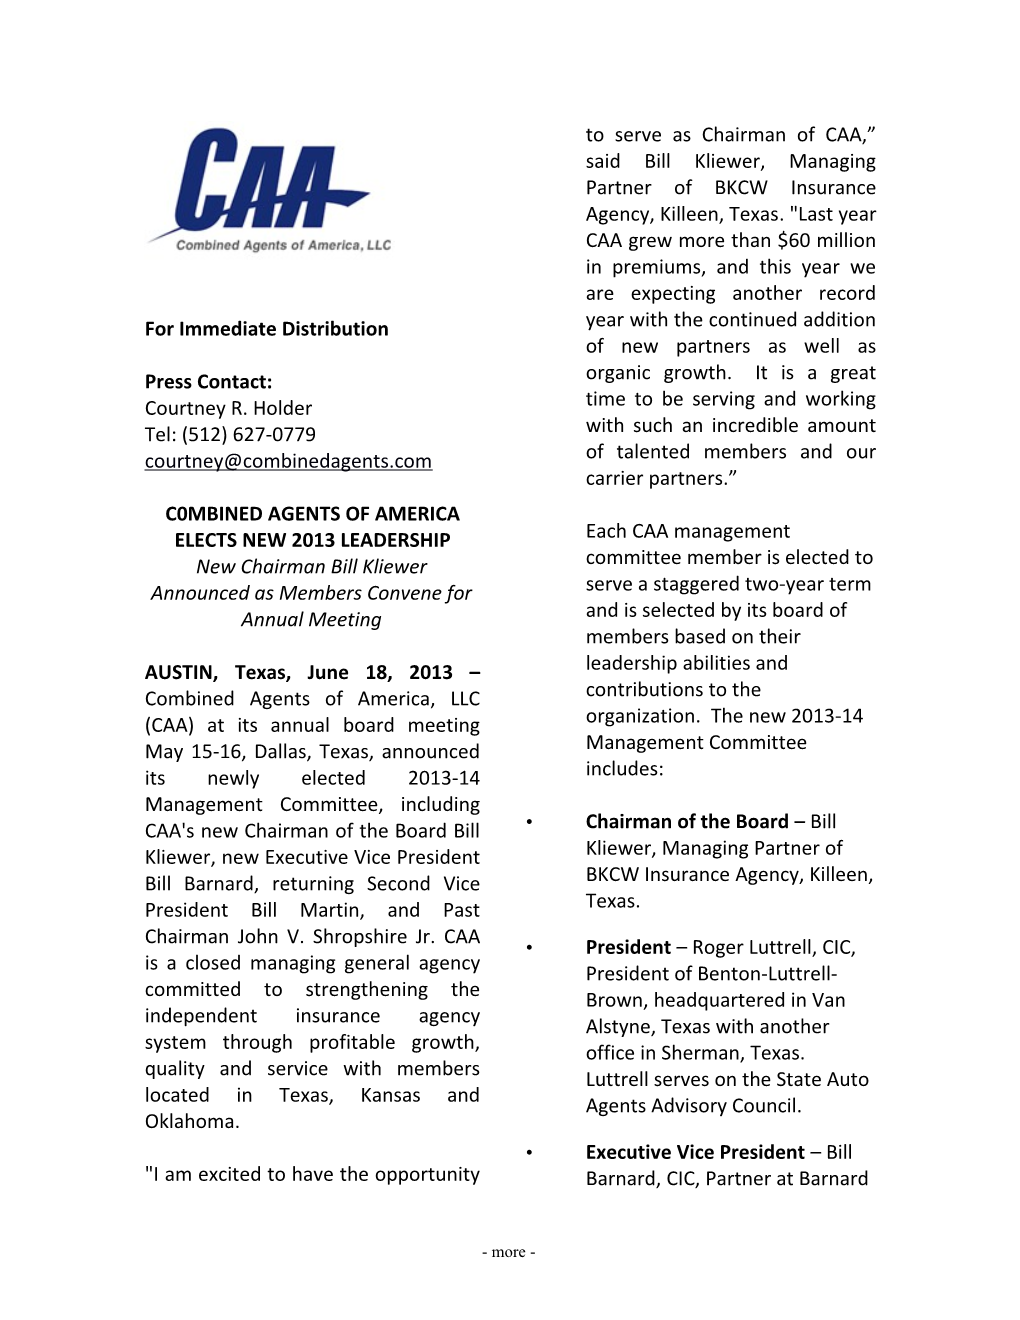 CAA: Strengthening the Independent Insurance Agency System Through Profitable Growth, Quality